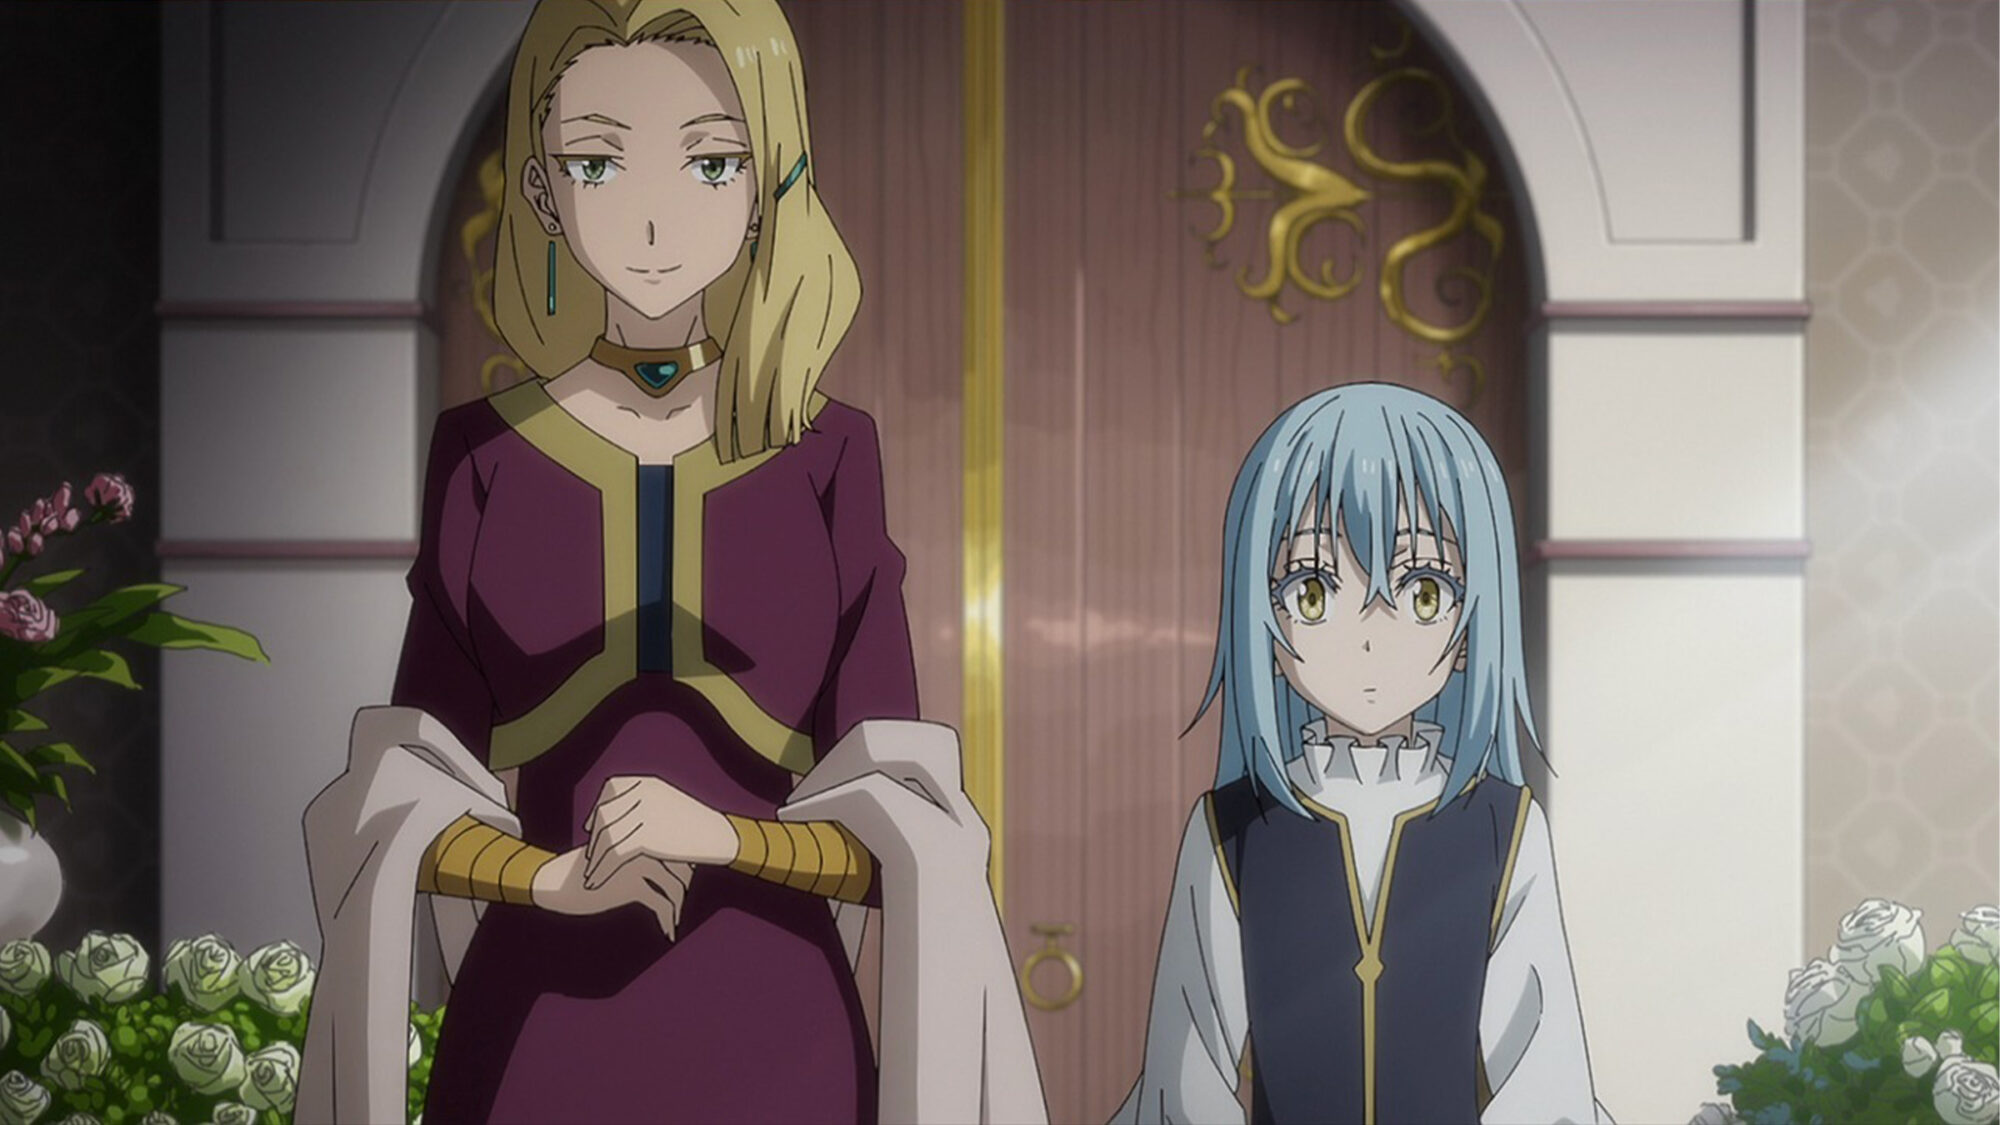 That Time I Got Reincarnated as a Slime: Visions of Coleus (Anime)